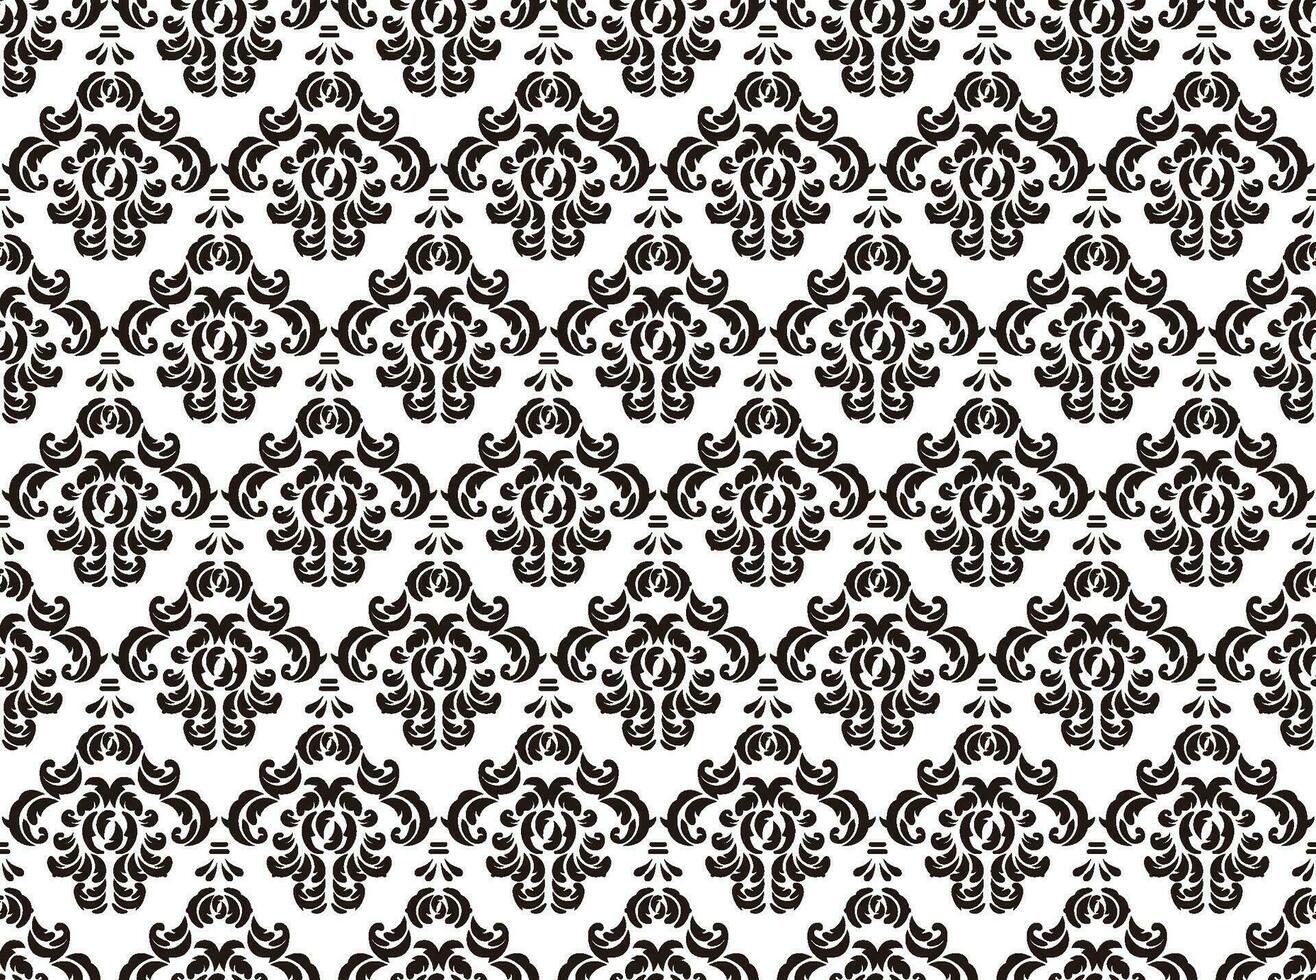 Horizontally And Vertically Repeatable Vector Seamless Damask Vintage Pattern.